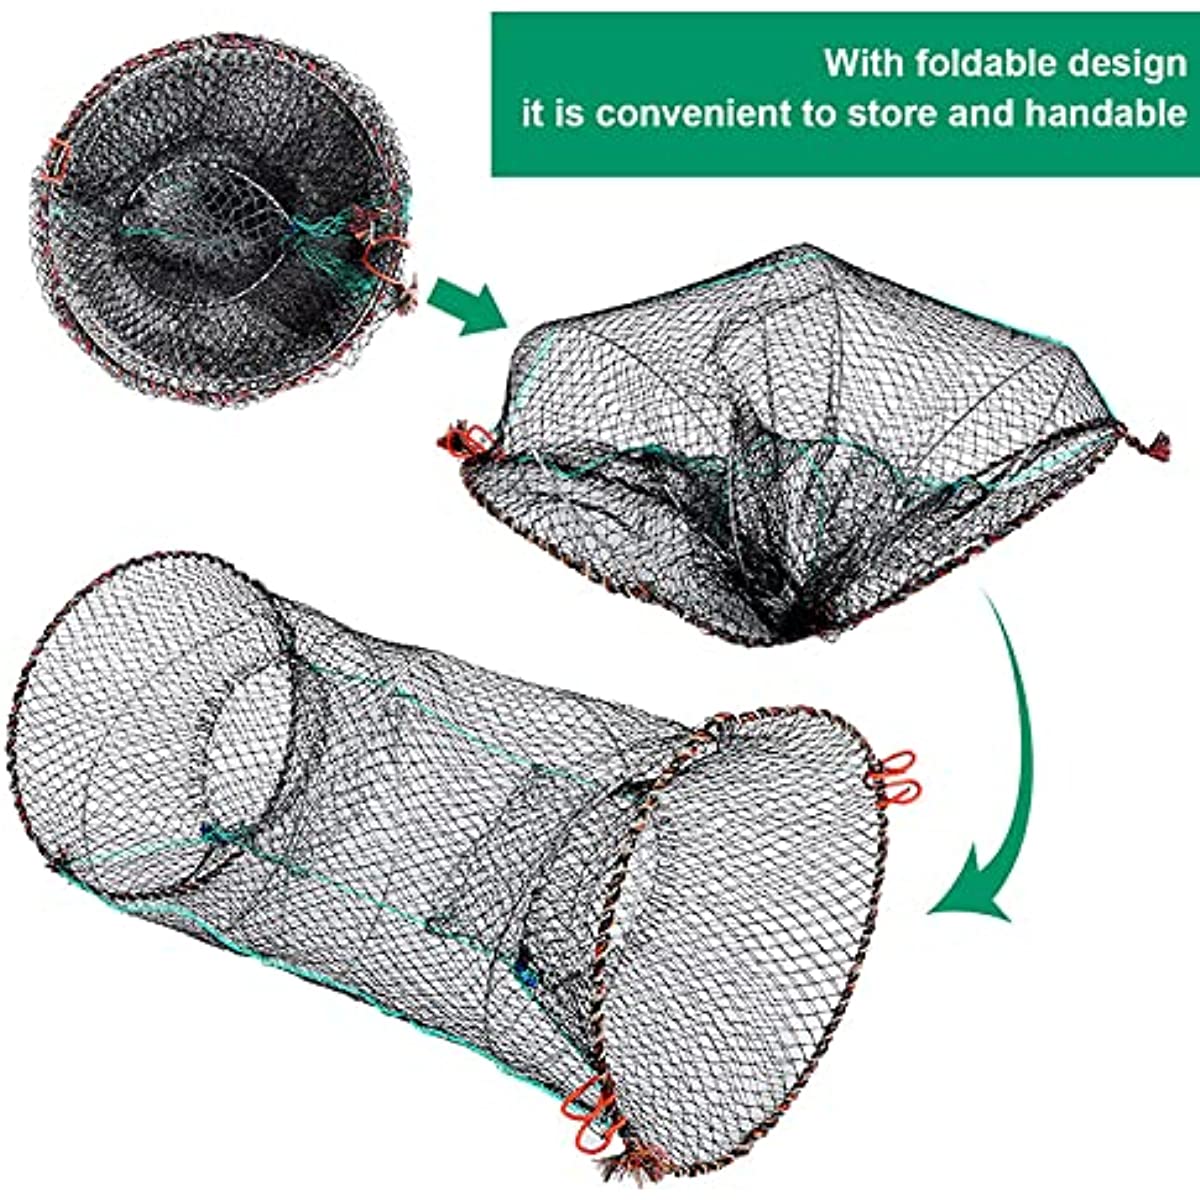 keepw Foldable Fishing Bait Fish Trap Nylon Mesh Fabric Long Service Life  Retractable Fish Shrimp Net Cage Trap With Food Bag without edge wrappin 